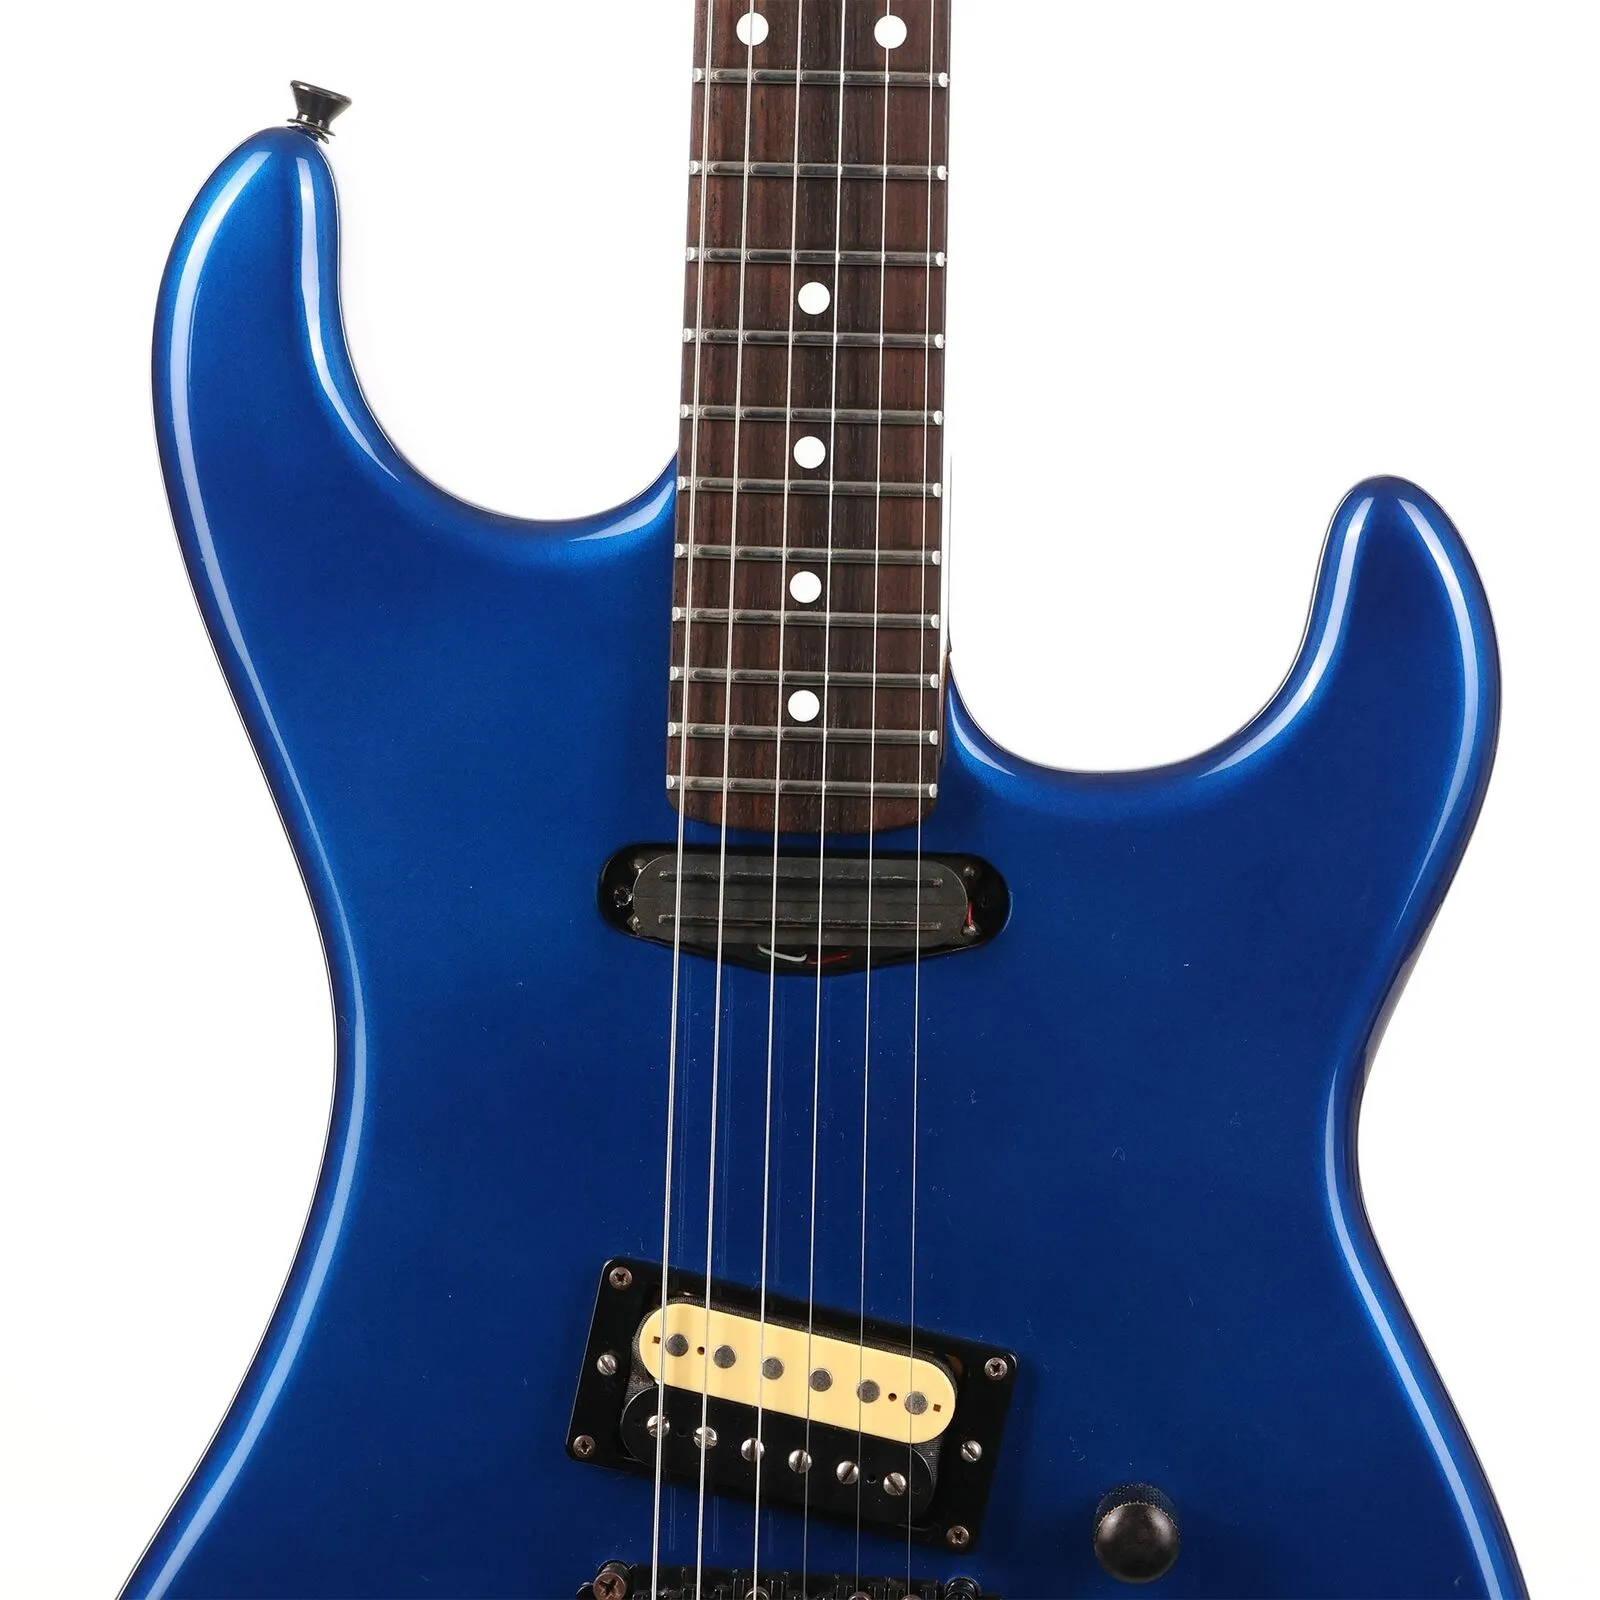 Kr am er EK-1BF Candy Blue Electric Guitar as same of the pictures